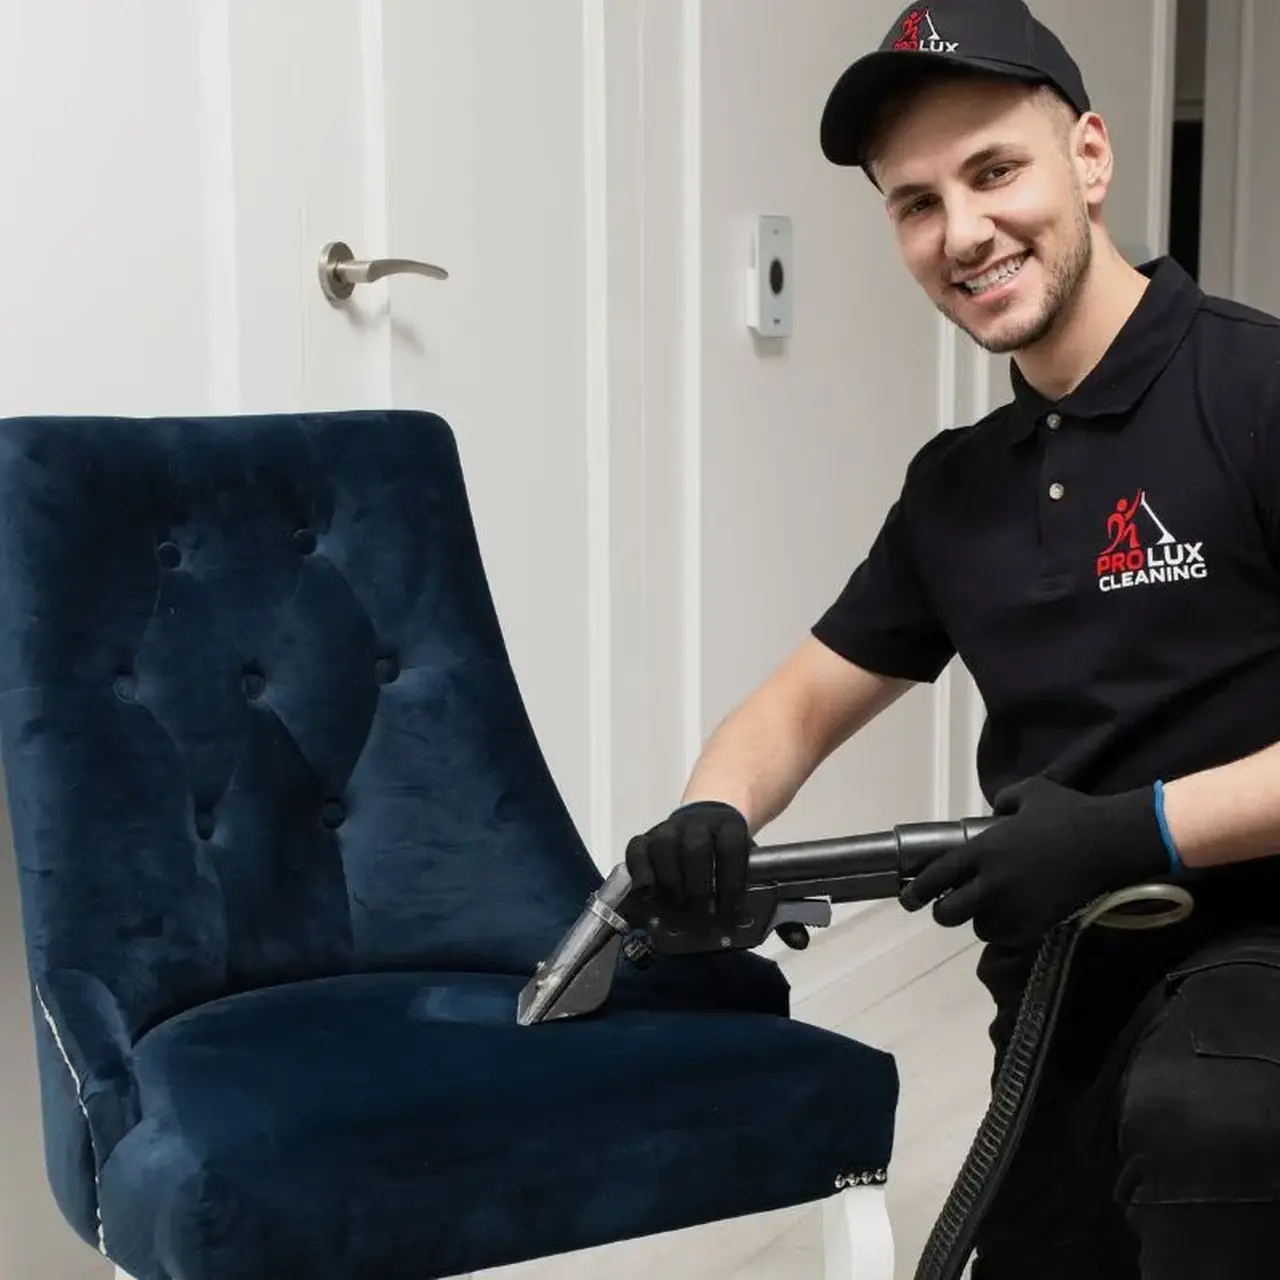 Upholstery Cleaners - Techician Bexley